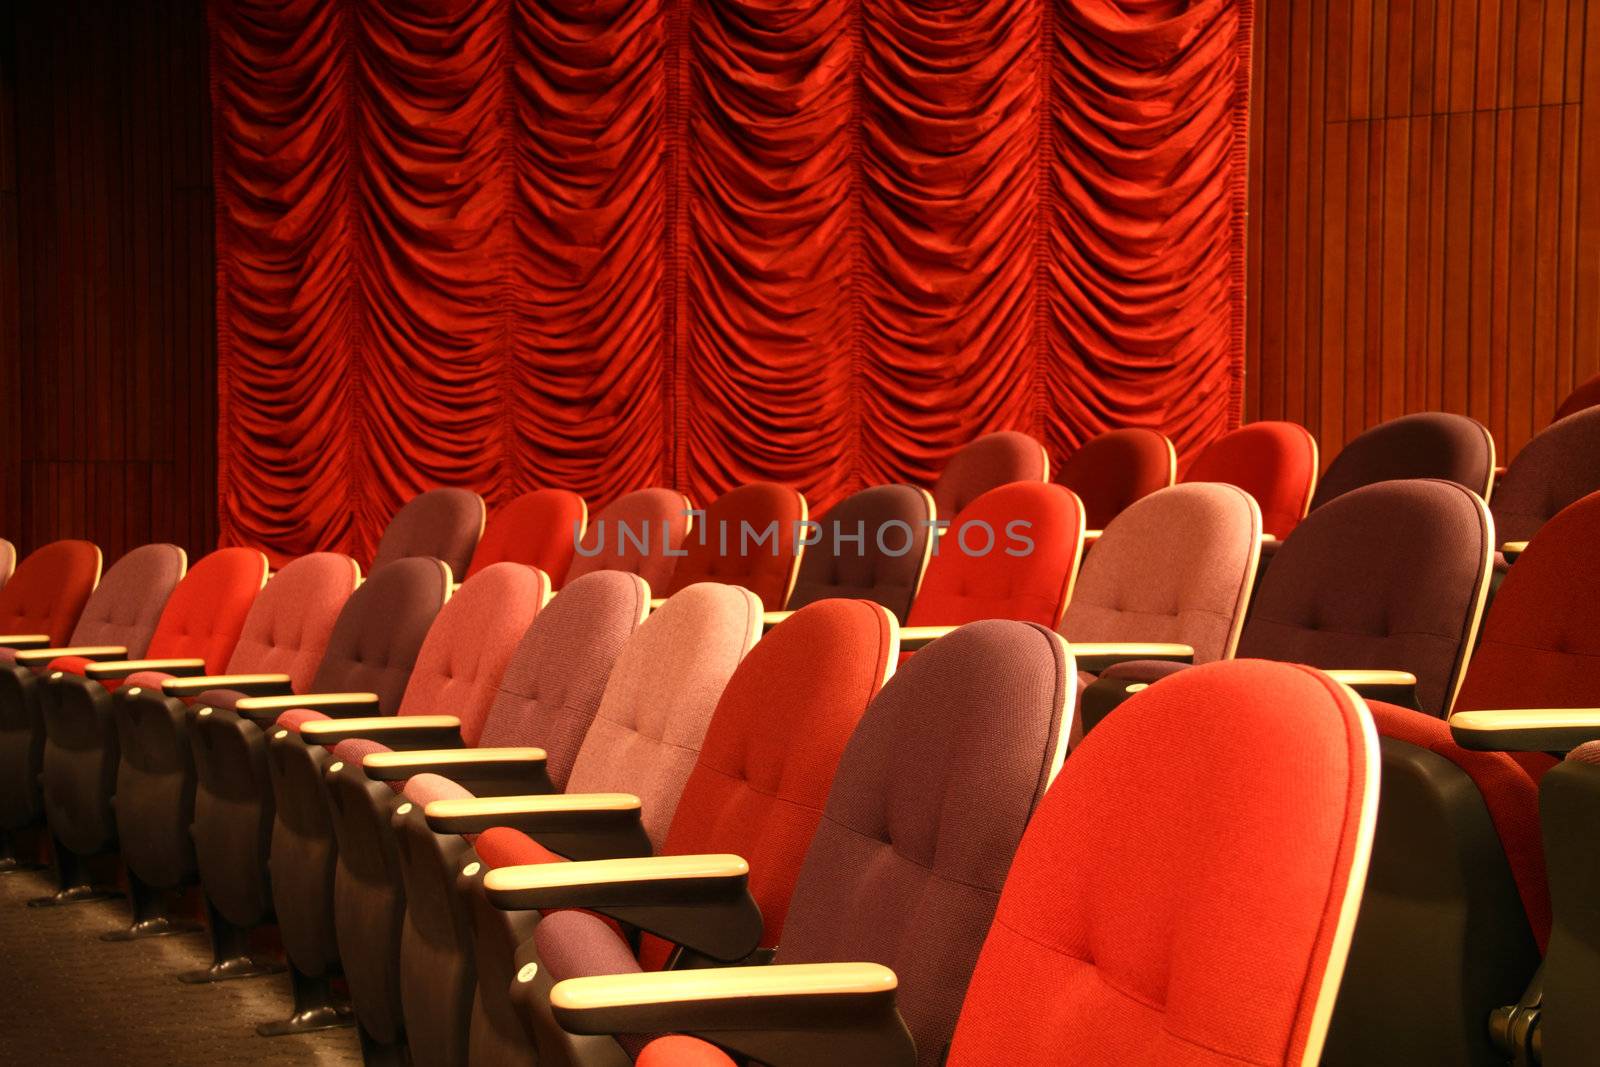 Row of seats in an empty theater